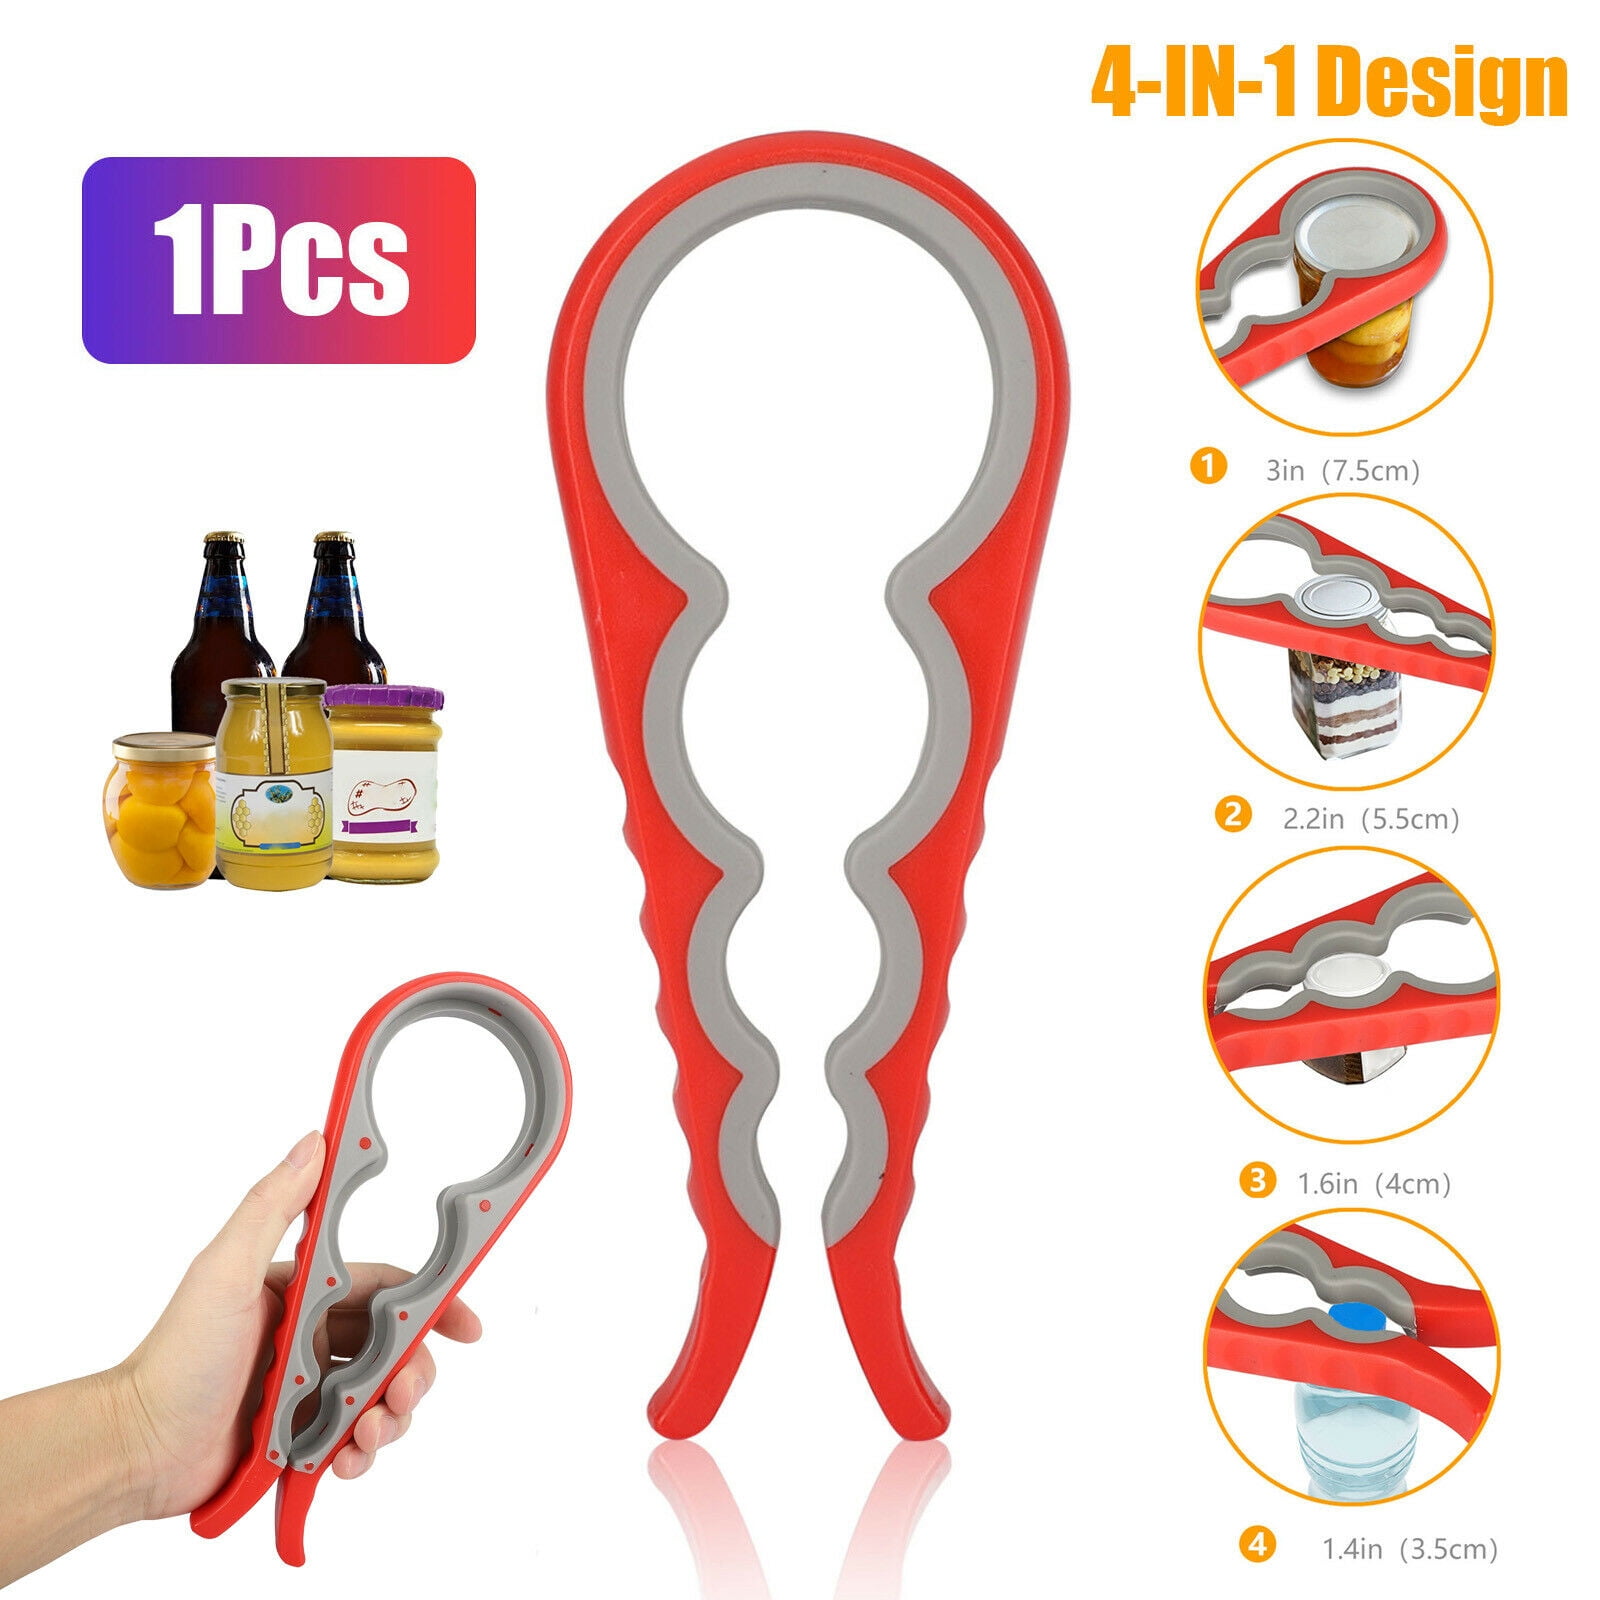 4 Sizes in 1 Gourd-shaped Can Jar Bottle Kitchen Opener Twister Wrench Tools LE 